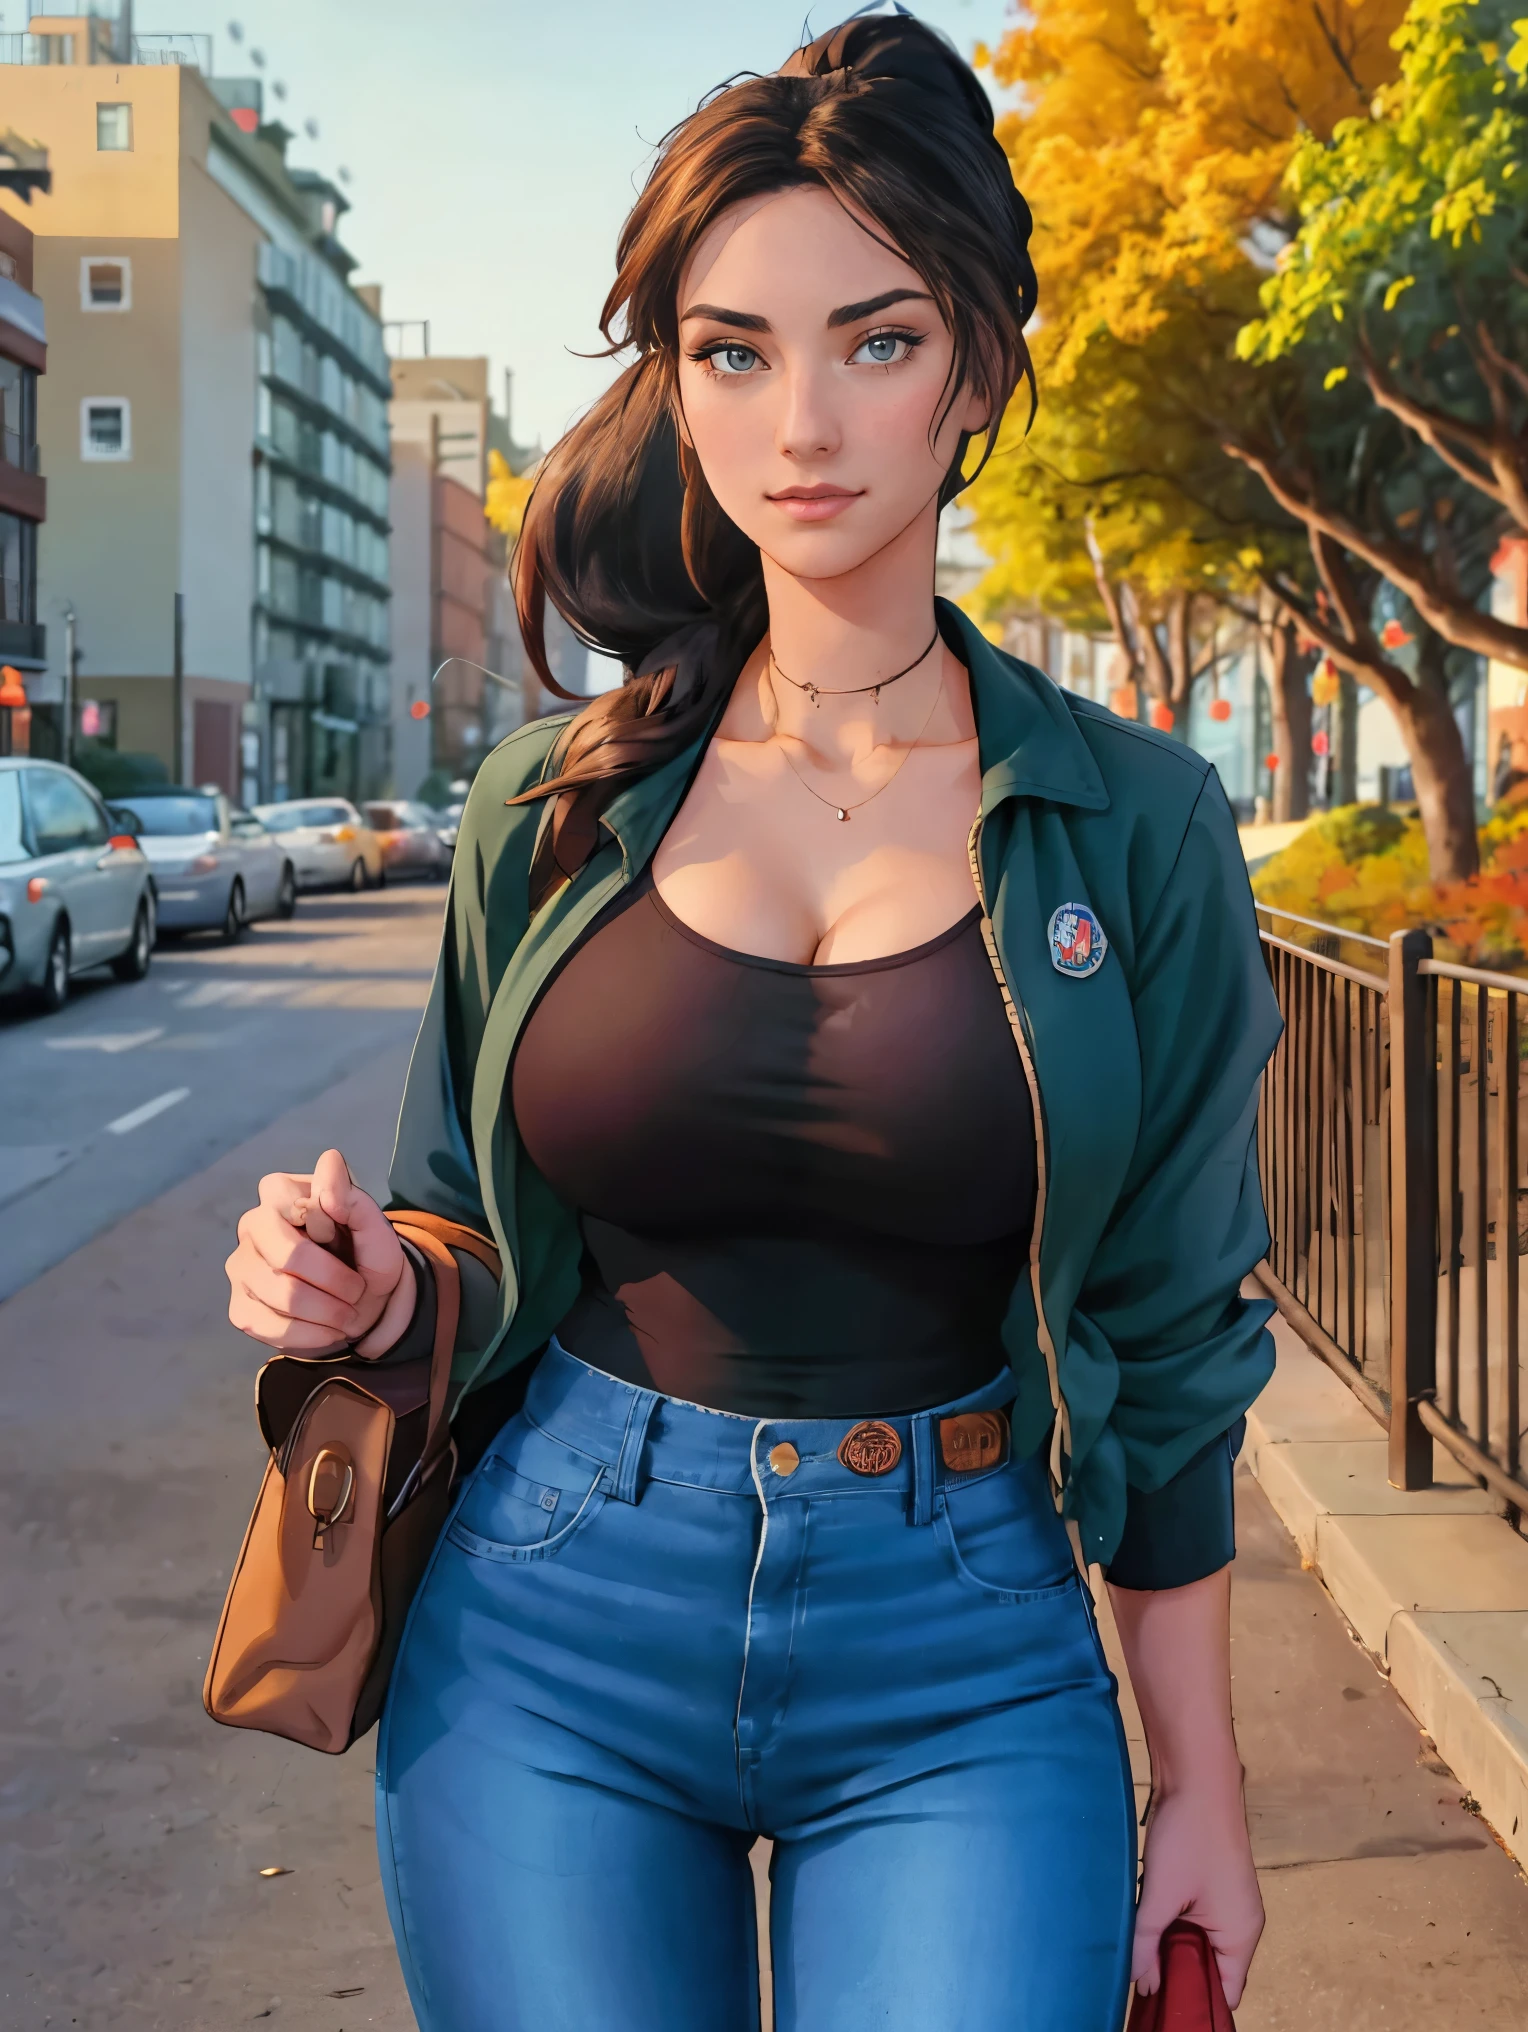 (masterpiece, top quality, best quality, official art, beautiful and aesthetic:1.2), (1girl:1.3), dark brown hair pulled back, elegant updo, extremely detailed, portrait, looking at viewer, facing viewer, solo, (full body:0.6), detailed background, close up, kindly eyes, (warm summer park theme:1.1), busty woman, charlatan, smirk, mysterious, long hair, huge ponytail, slim, thin, athletic, womanly, elastic woman, dark green jacket, tank top, blue jeans, hair bandana, camera bag, brunette, city, heroic, cheerful, city exterior, park, street, daylight, soft lighting, natural lighting, athletic, strong, slim waist, slim hips, long legs, muscular legs, modern (city park exterior:1.1) background, bright mysterious lighting, shadows, magical atmosphere, dutch angle,